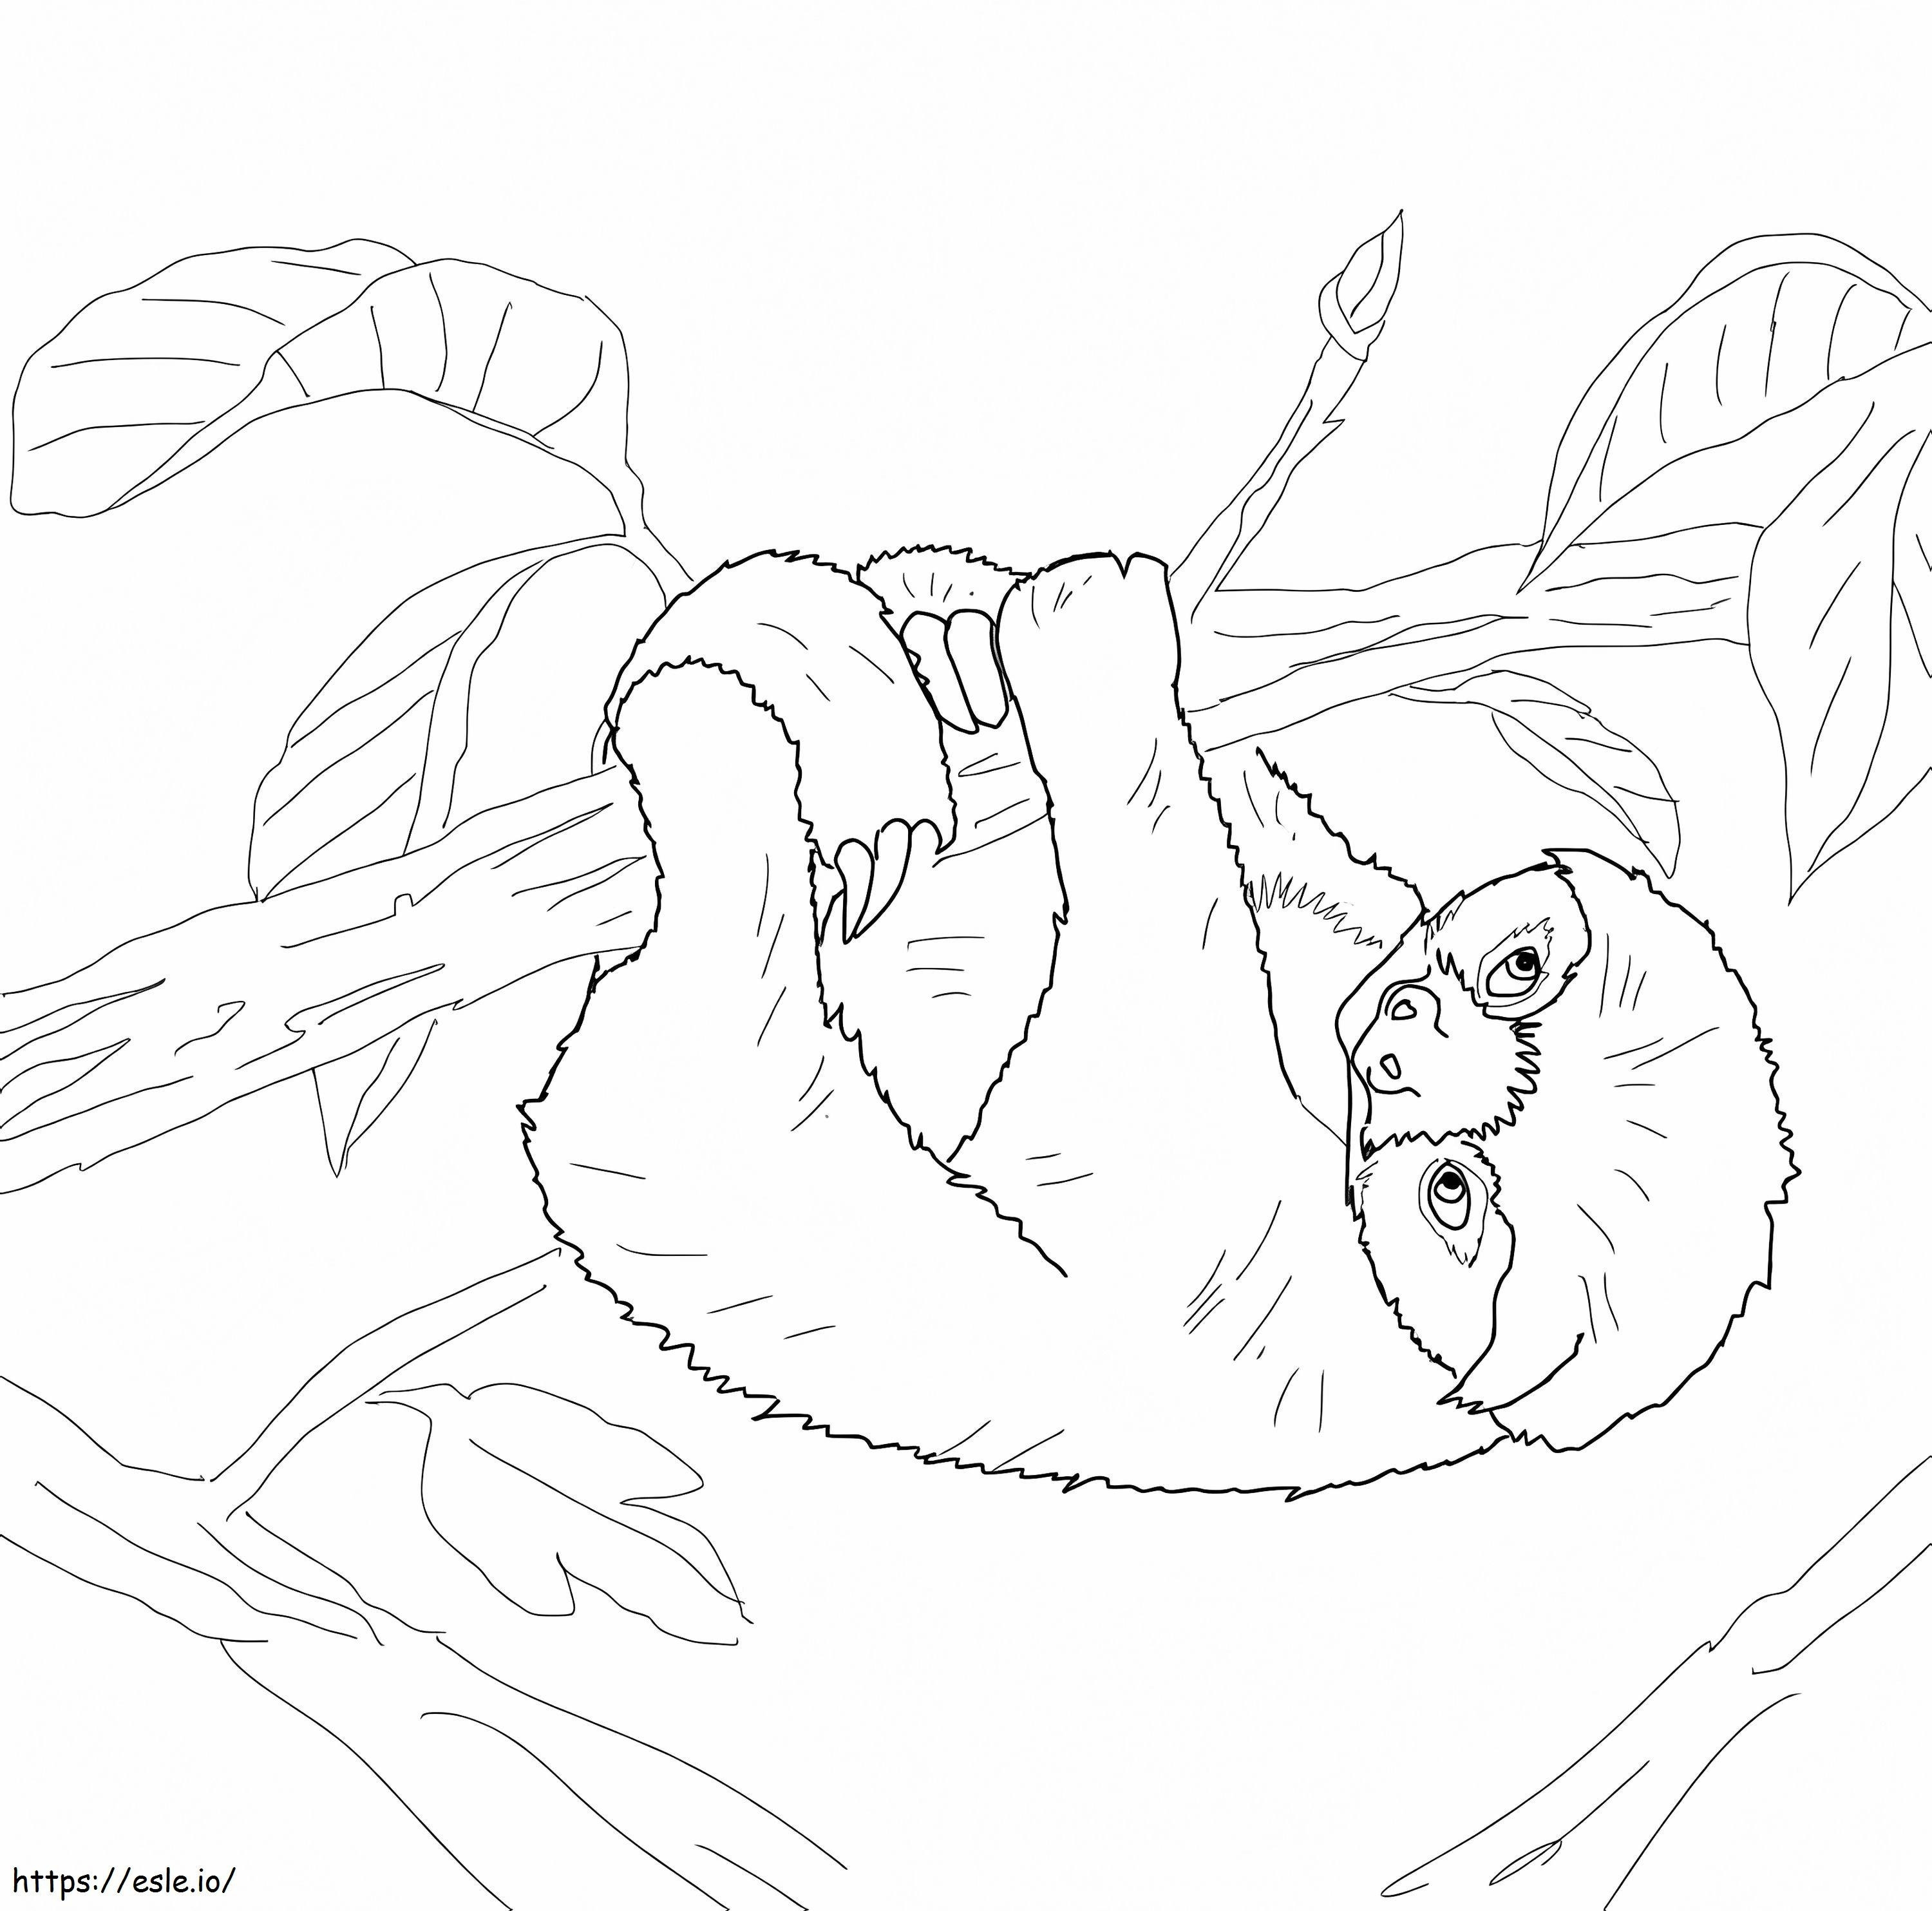 Baby Sloth coloring page